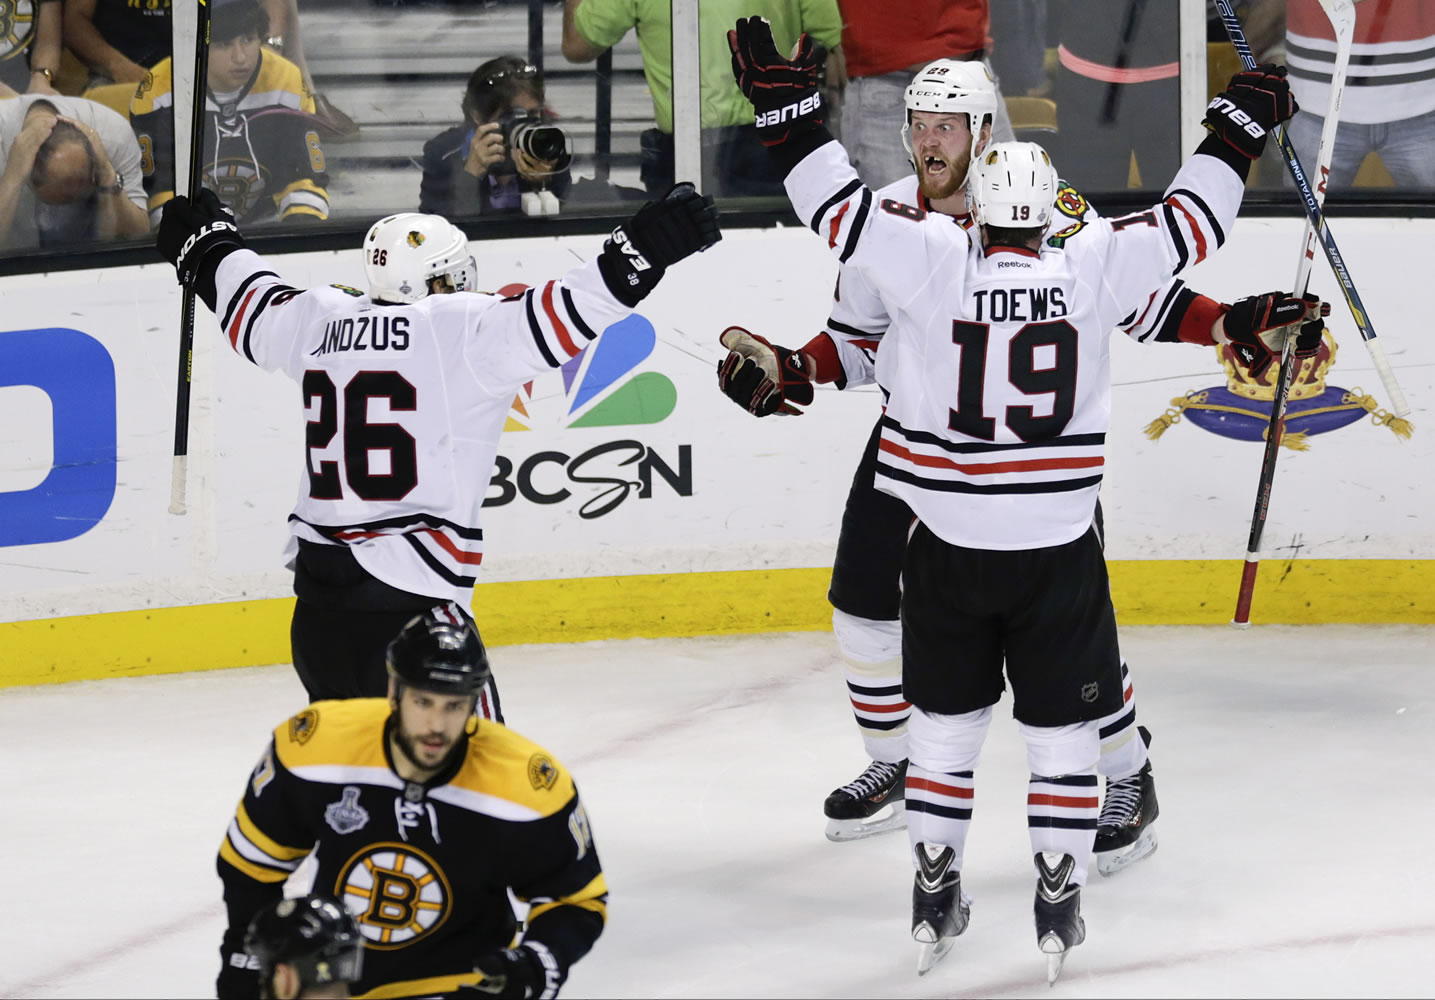 Chicago Blackhawks left wing Bryan Bickell, center, celebrates his goal with Jonathan Toews (19) and Michal Handzus (26) during the third period in Game 6 on Monday.